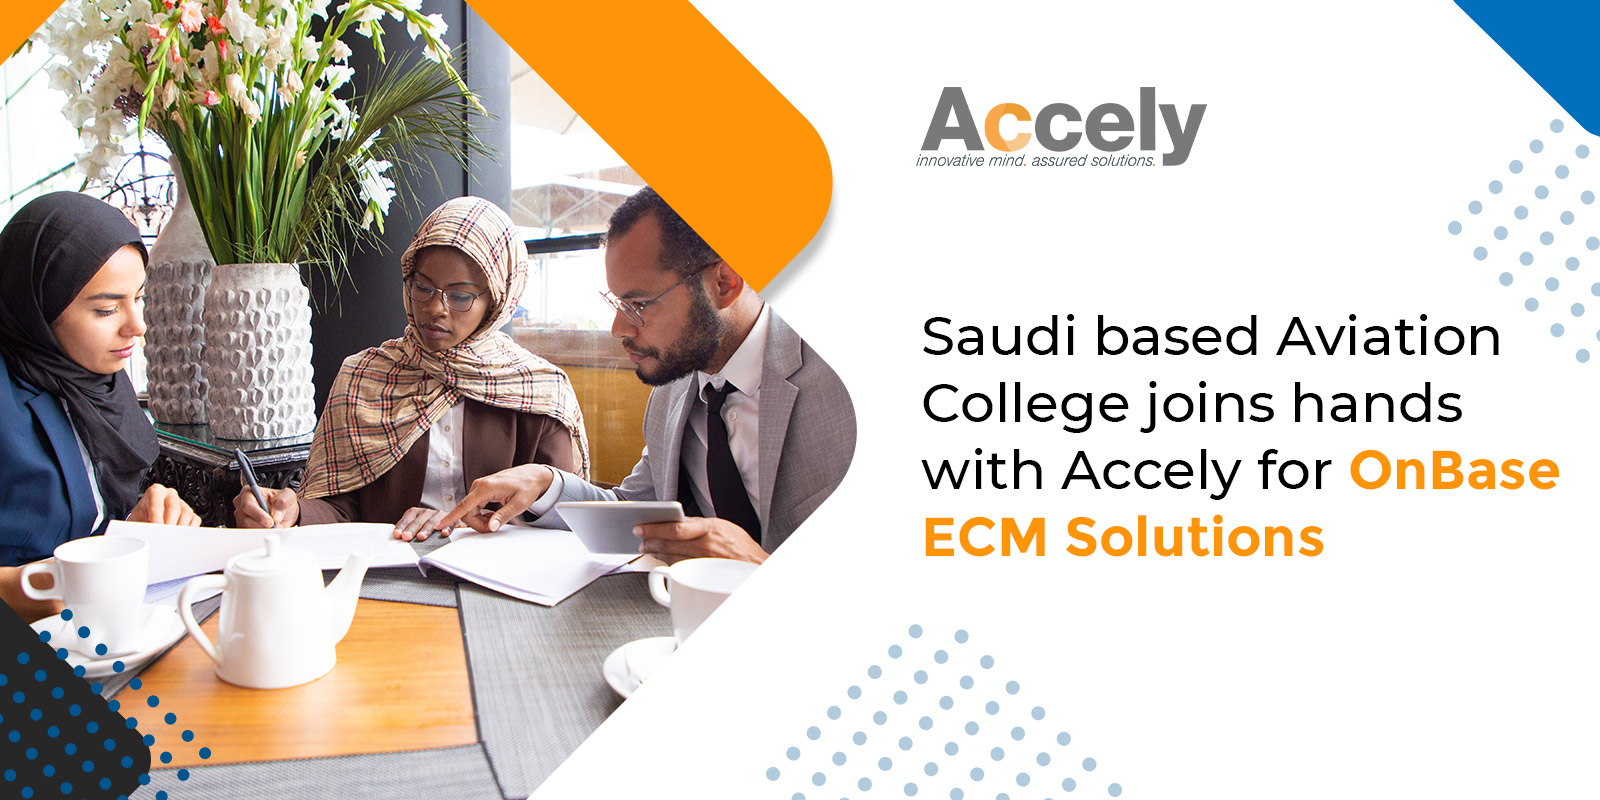 Saudi based Aviation College joins hands with Accely for OnBase ECM Solutions